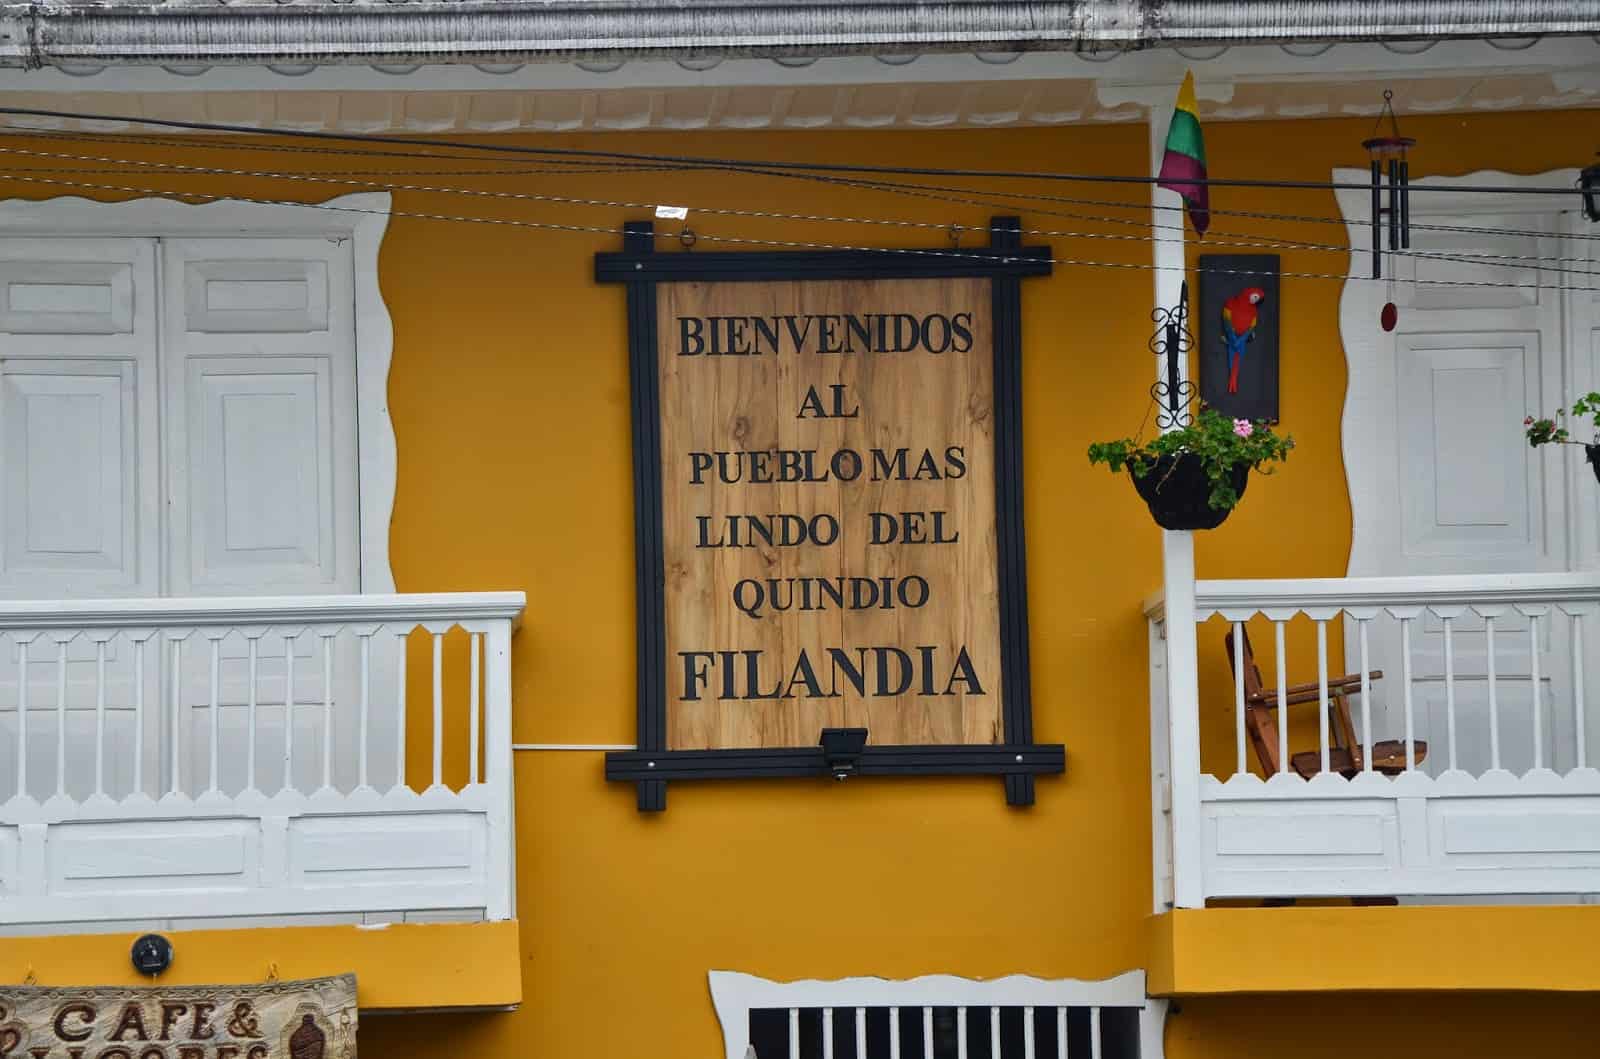 "Welcome to the most beautiful town of Quindío" in Filandia, Quindío, Colombia